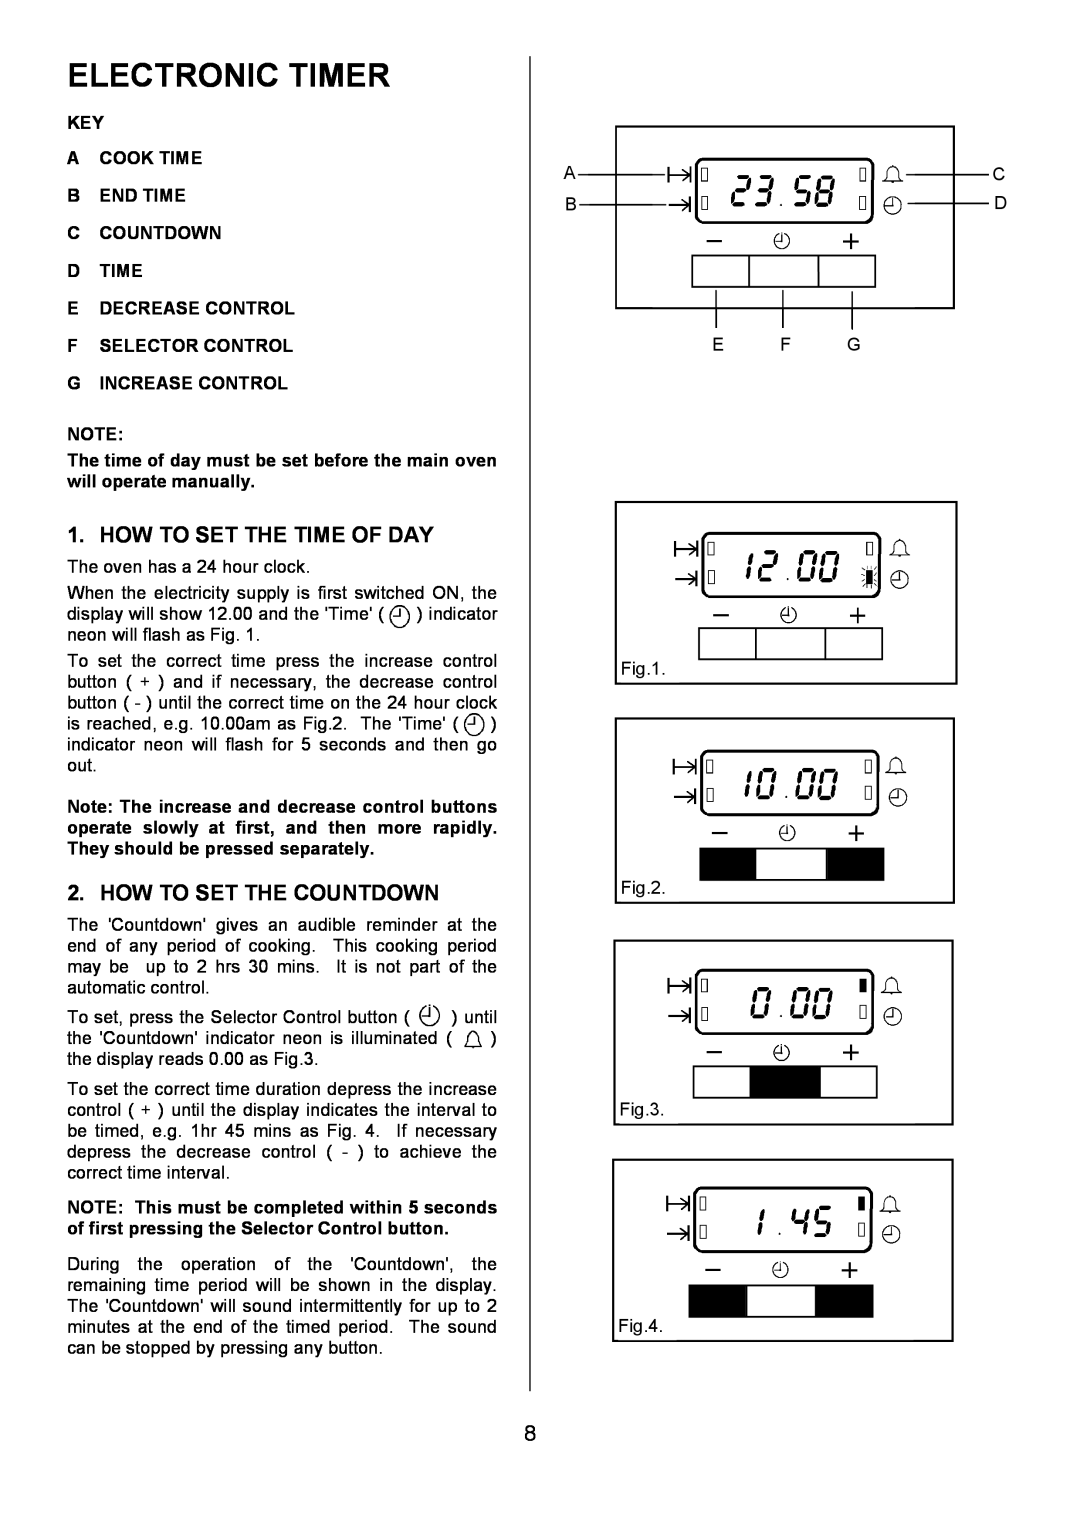 Electrolux D4101-4 operating instructions Electronic Timer, How To Set The Time Of Day, How To Set The Countdown 